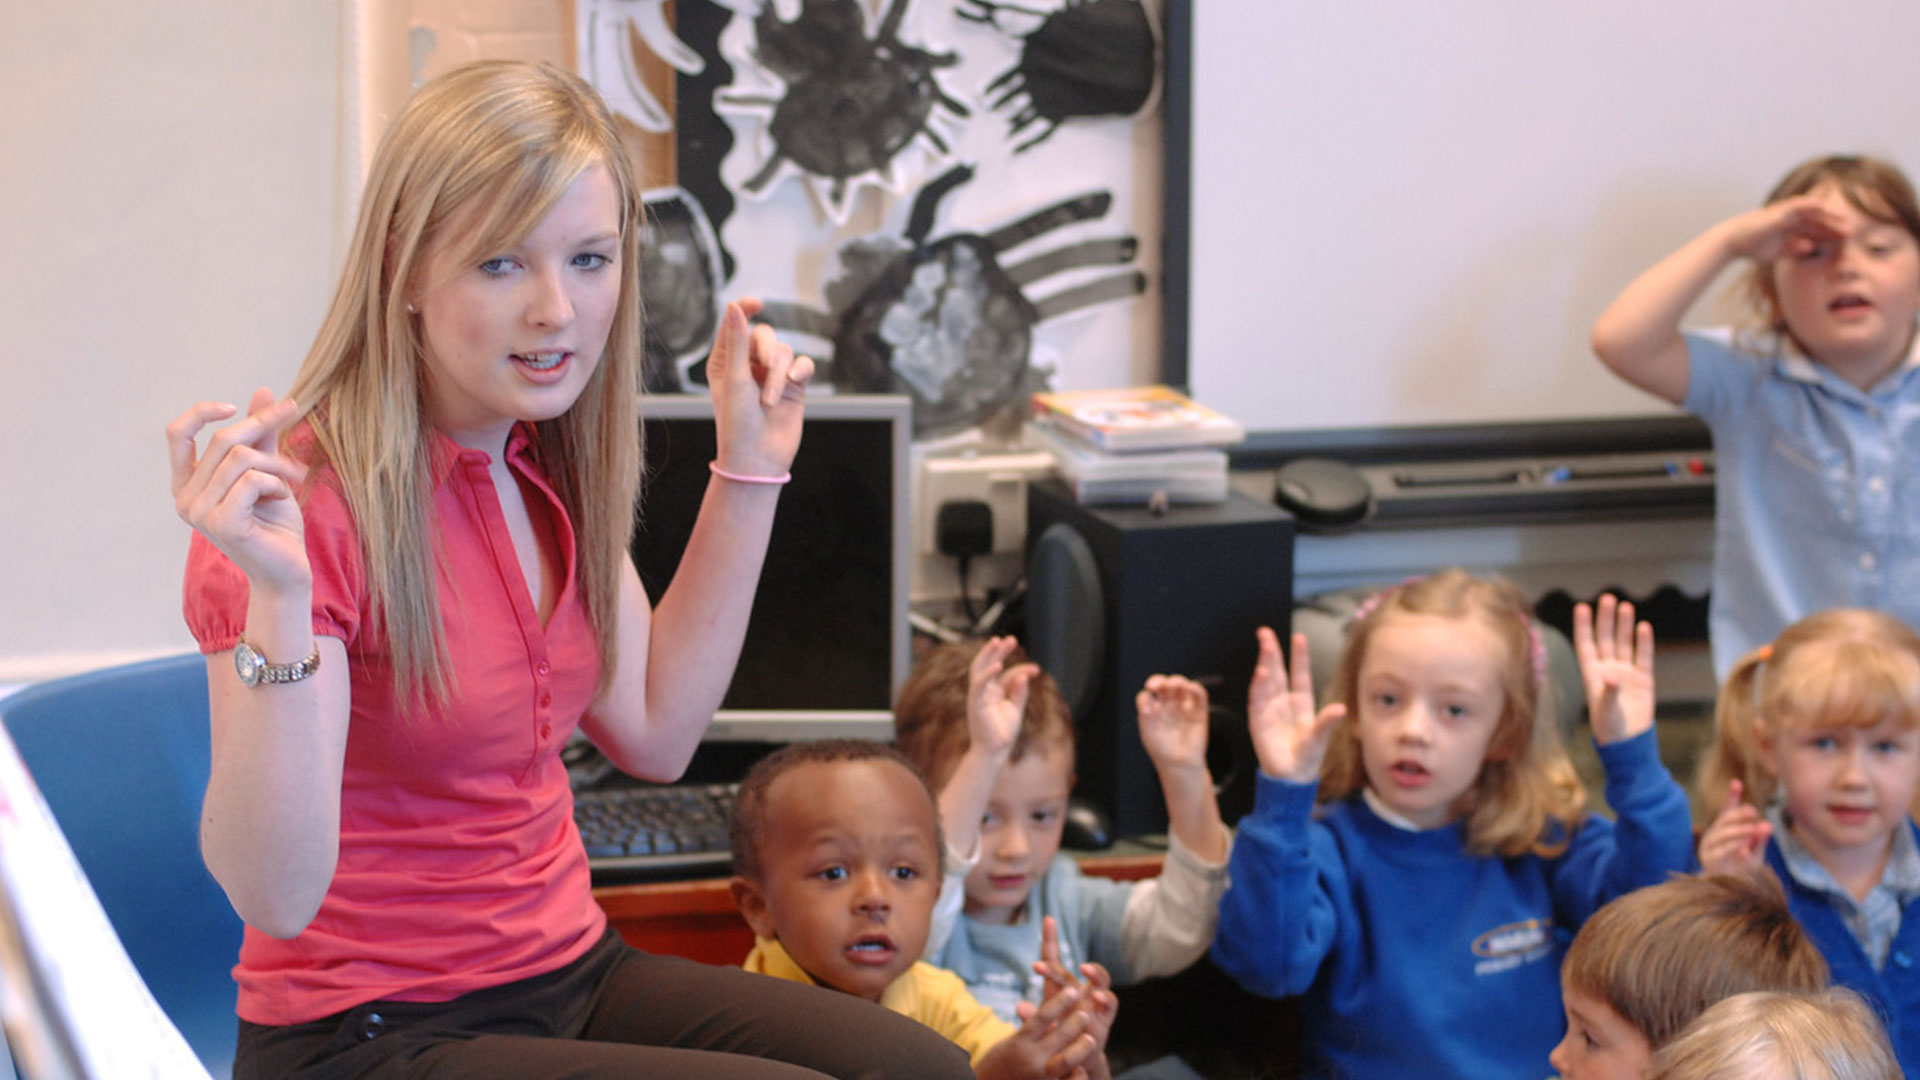 A teacher sits on a chair, singing a song with young children sitting on the floor